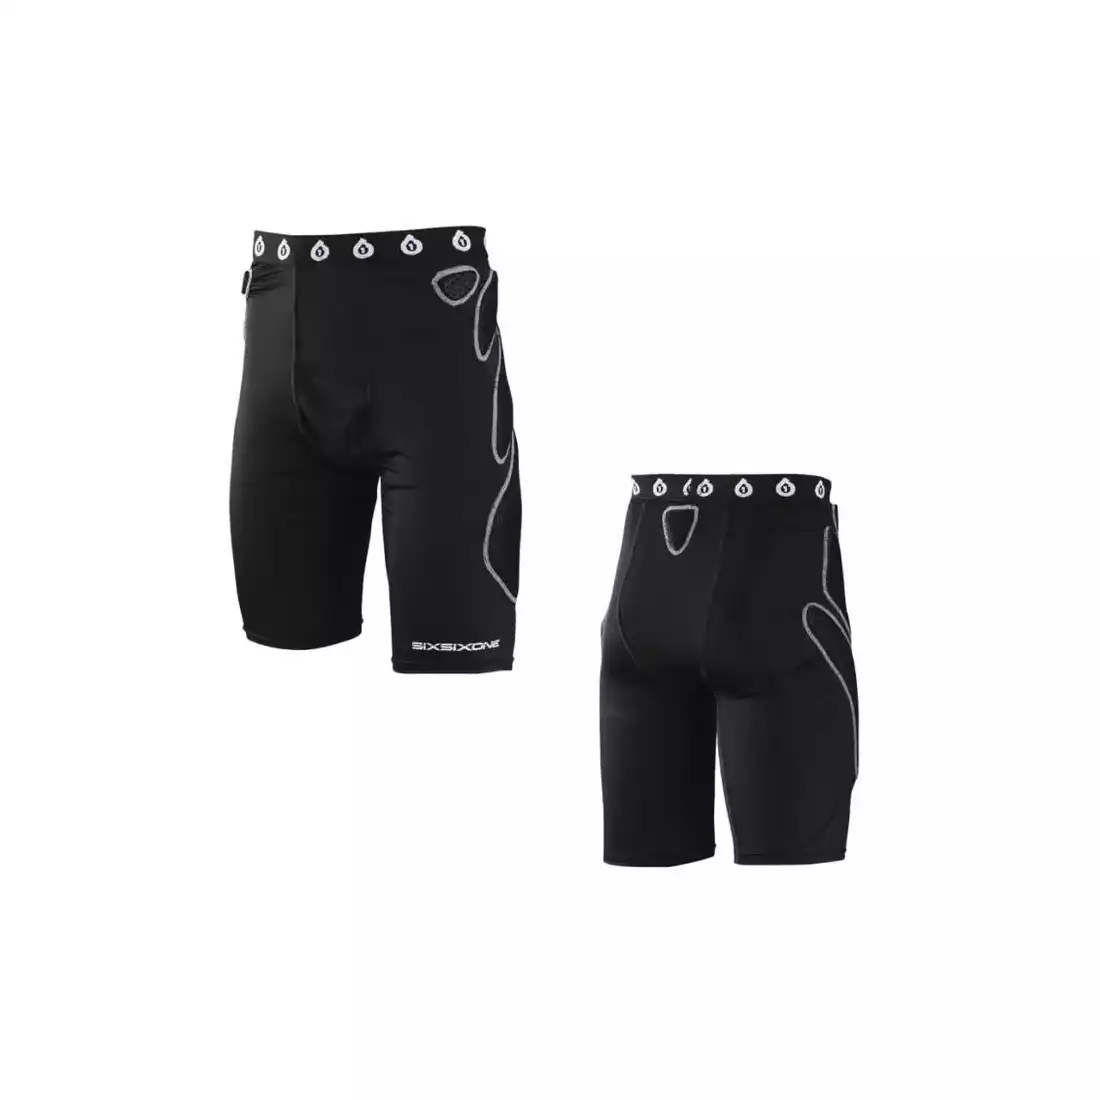 661 EXO men's cycling boxer shorts with hip and thigh protection, black